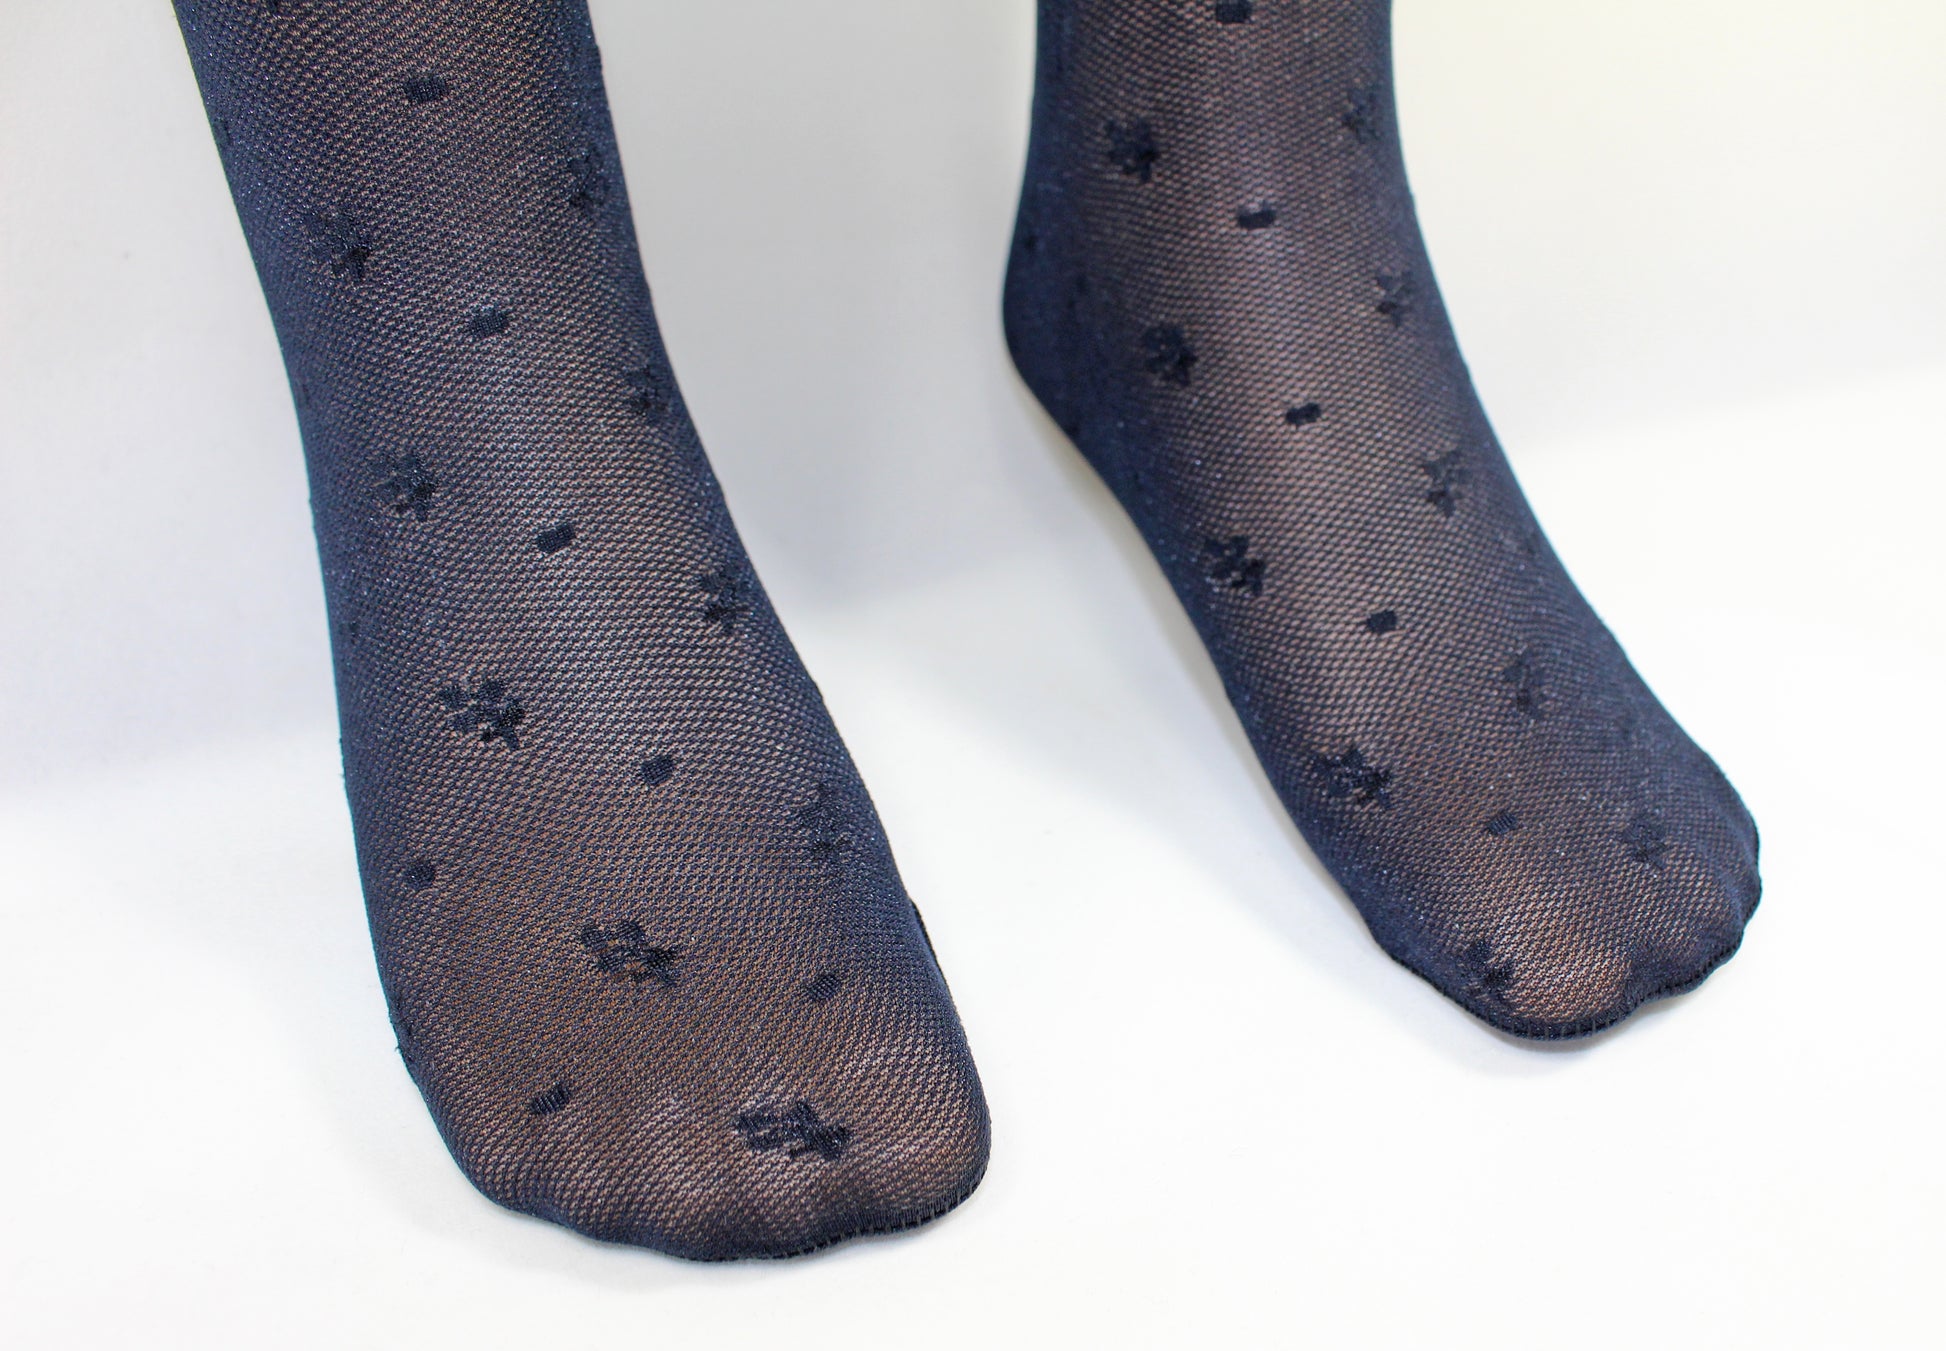 Omsa Cordoba Collant - Navy blue semi opaque micro mesh kid's fashion tights with an all over woven flower and spot pattern and circular lace effect over the knee bands.